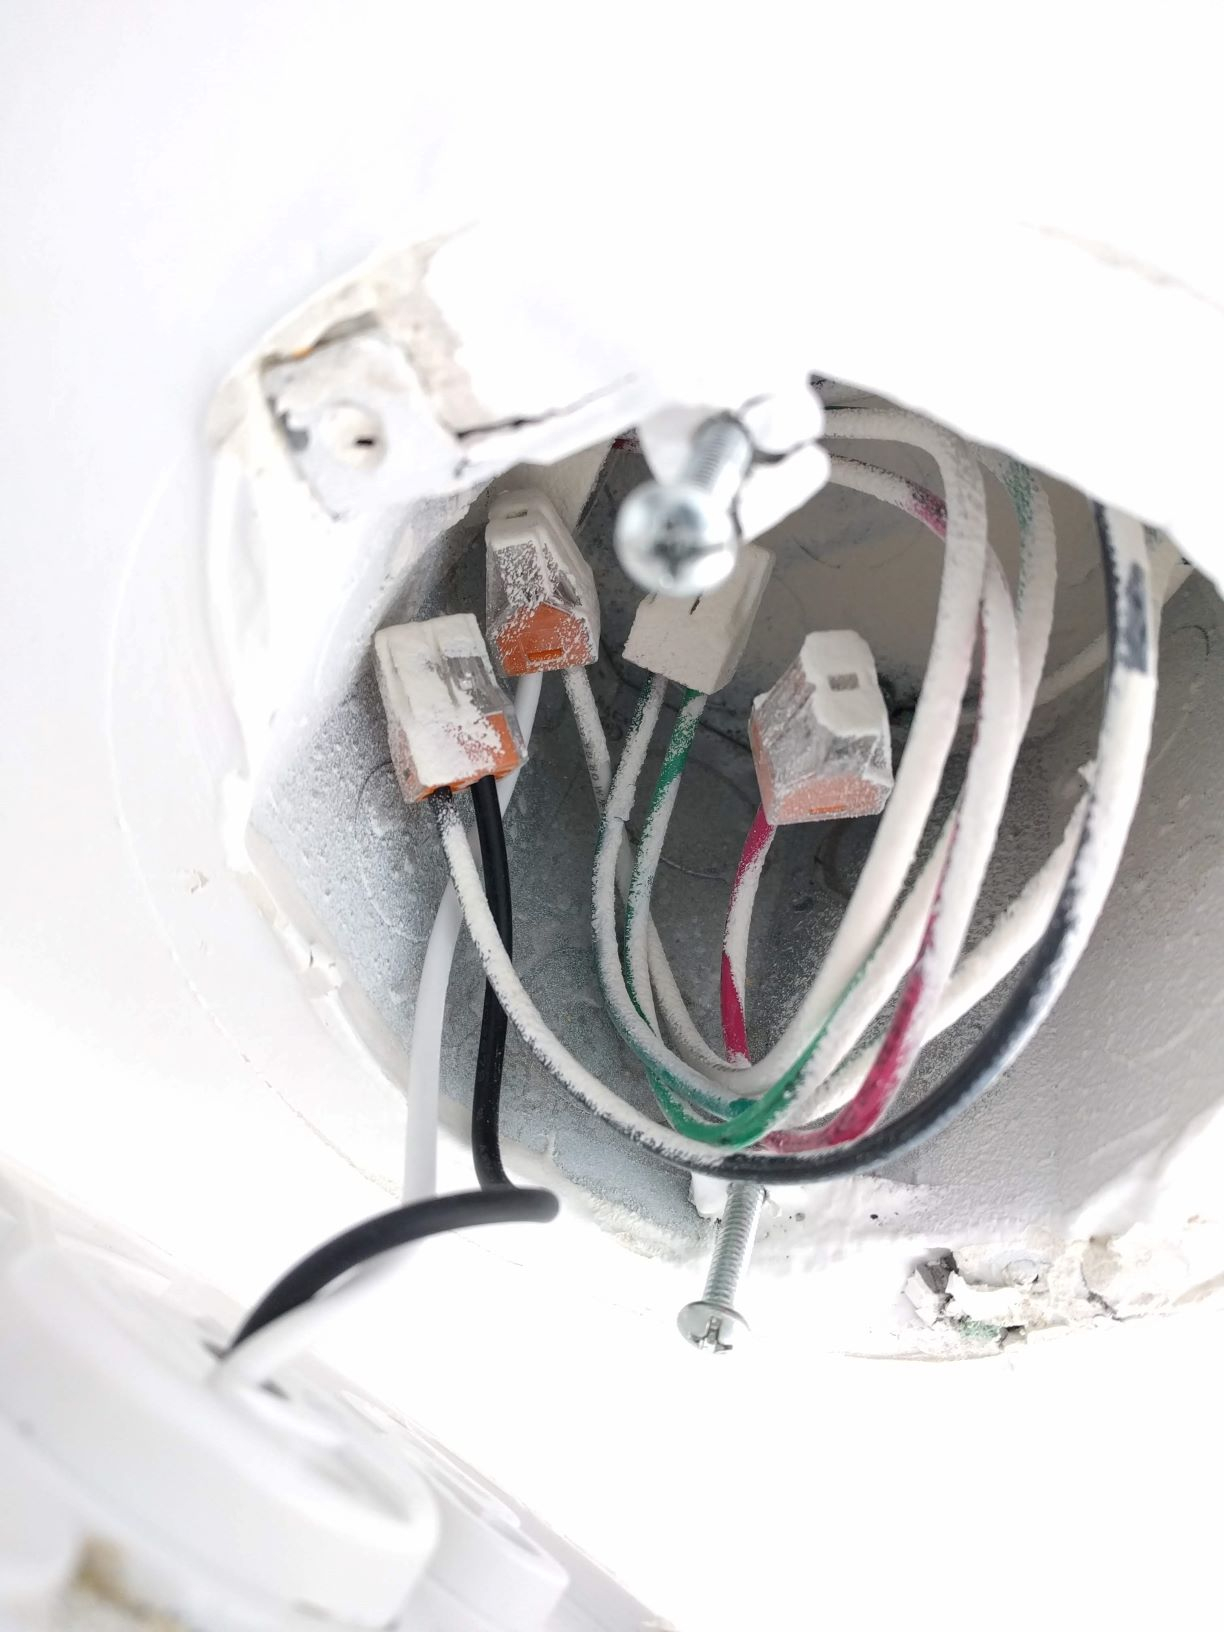 Wiring A Ceiling Fan With Black White Red Green In in size 1224 X 1632